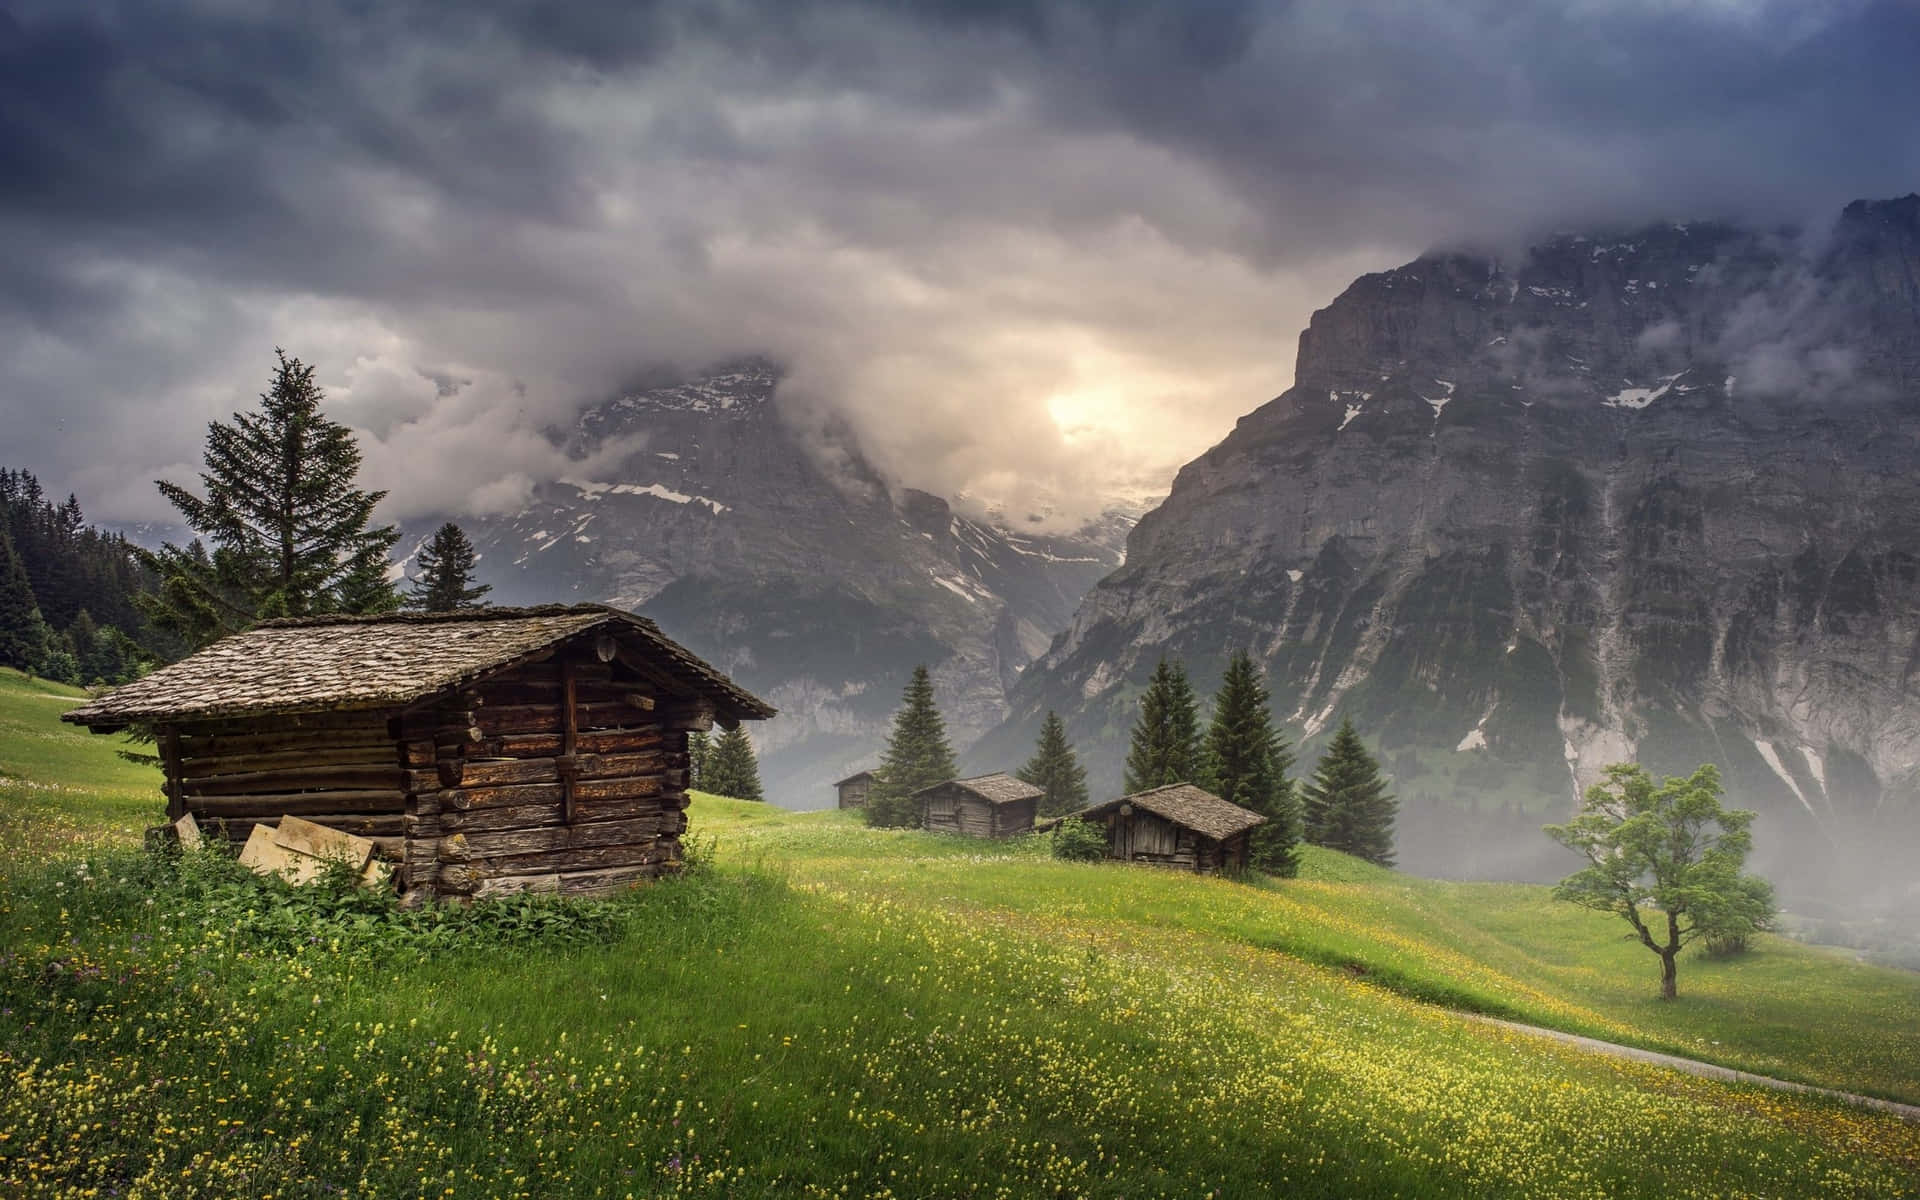 "Enjoy the peace and serenity of a lone hut in nature."